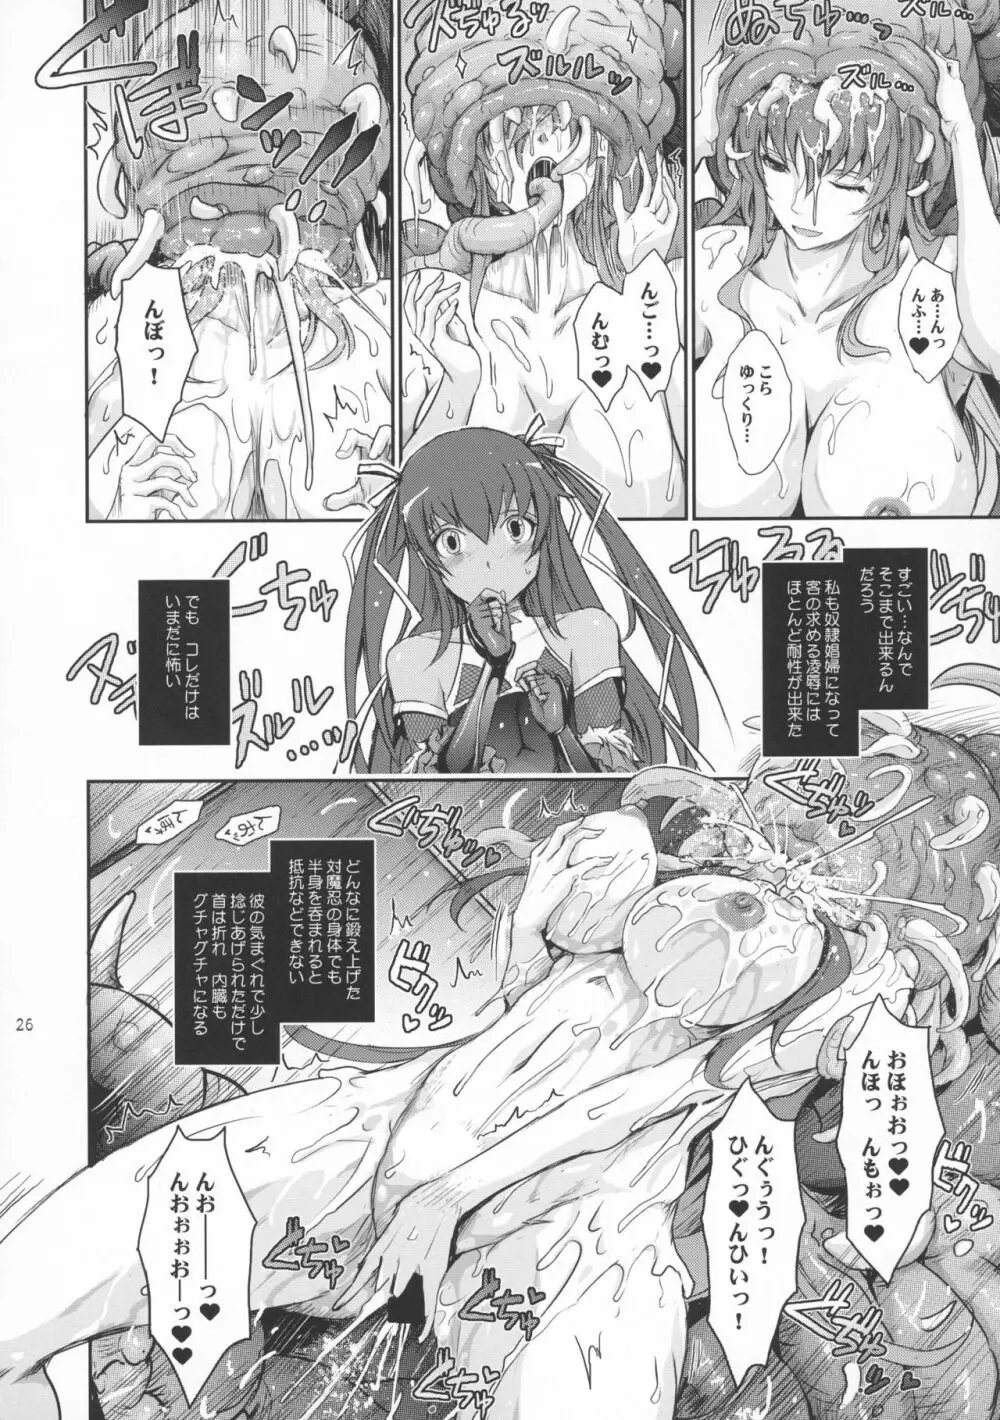 TENTACLES 隷嬢秋山凛子の蜜箱 Page.26